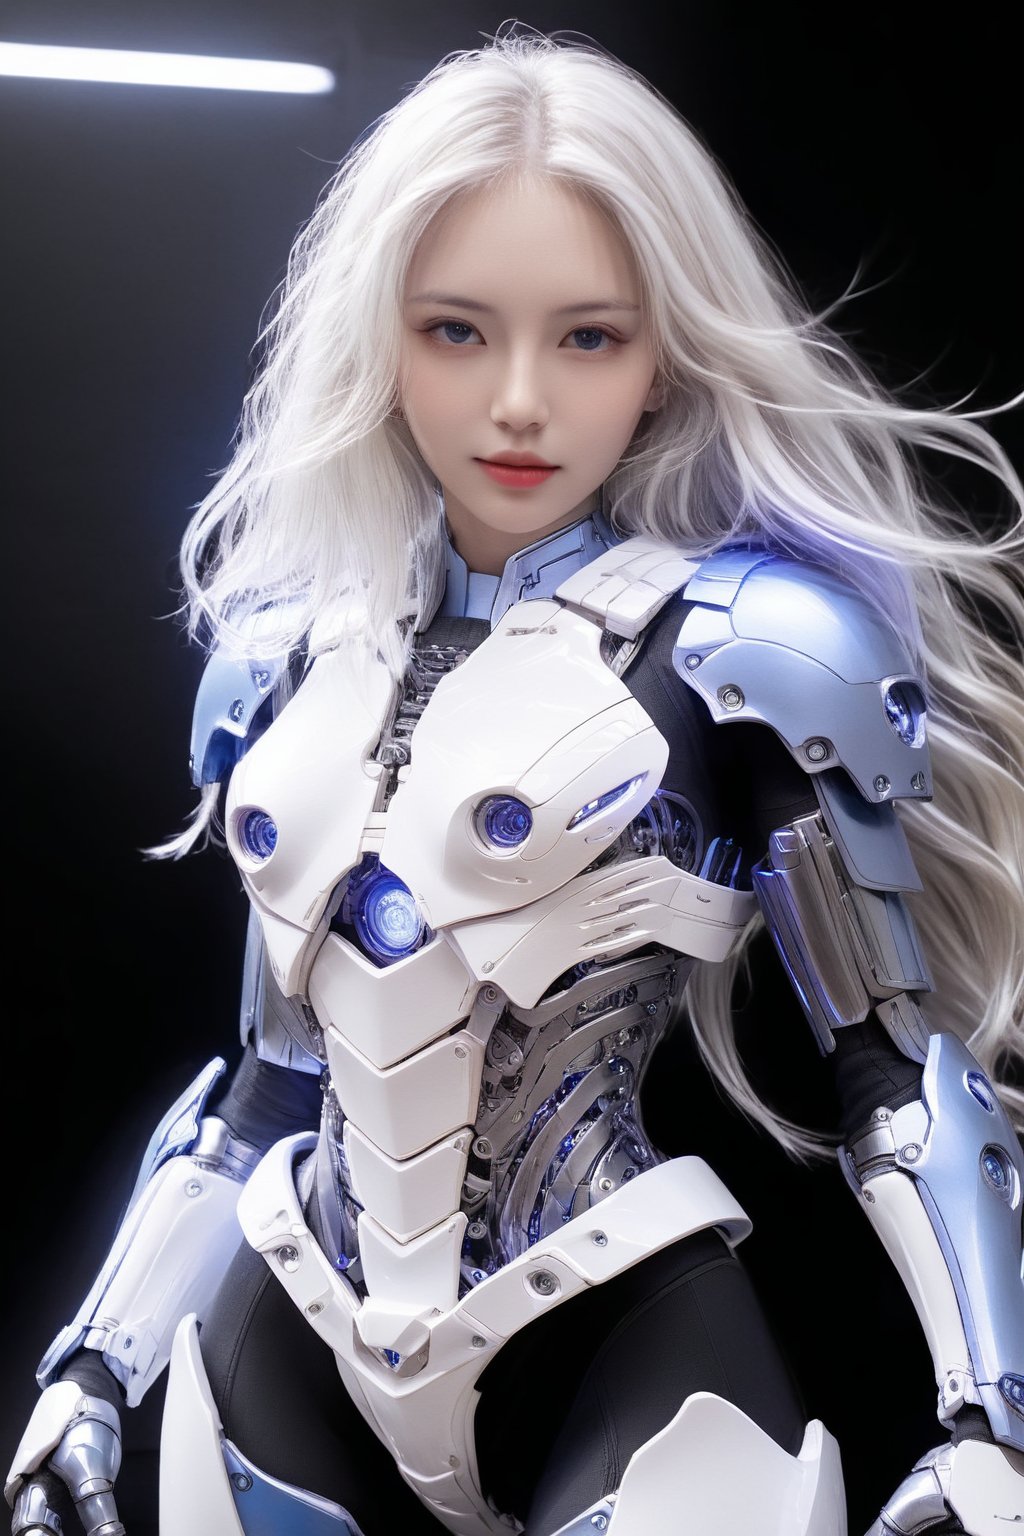 (ultra realistic,best quality),photorealistic,Extremely Realistic, in depth, cinematic light,hubgwomen,hubg_beauty_girl,

front_view, masterpiece, best quality, photorealistic, raw photo, (1girl, looking at viewer), long white hair, mechanical white armor, intricate armor, delicate blue filigree, intricate filigree, red metalic parts, detailed part, dynamic pose, detailed background, dynamic lighting, HUBG_Mecha_Armor,

intricate background, realism,realistic,raw,analog,portrait,photorealistic, HUBG_Mecha_Armor,hubg_mecha_girl